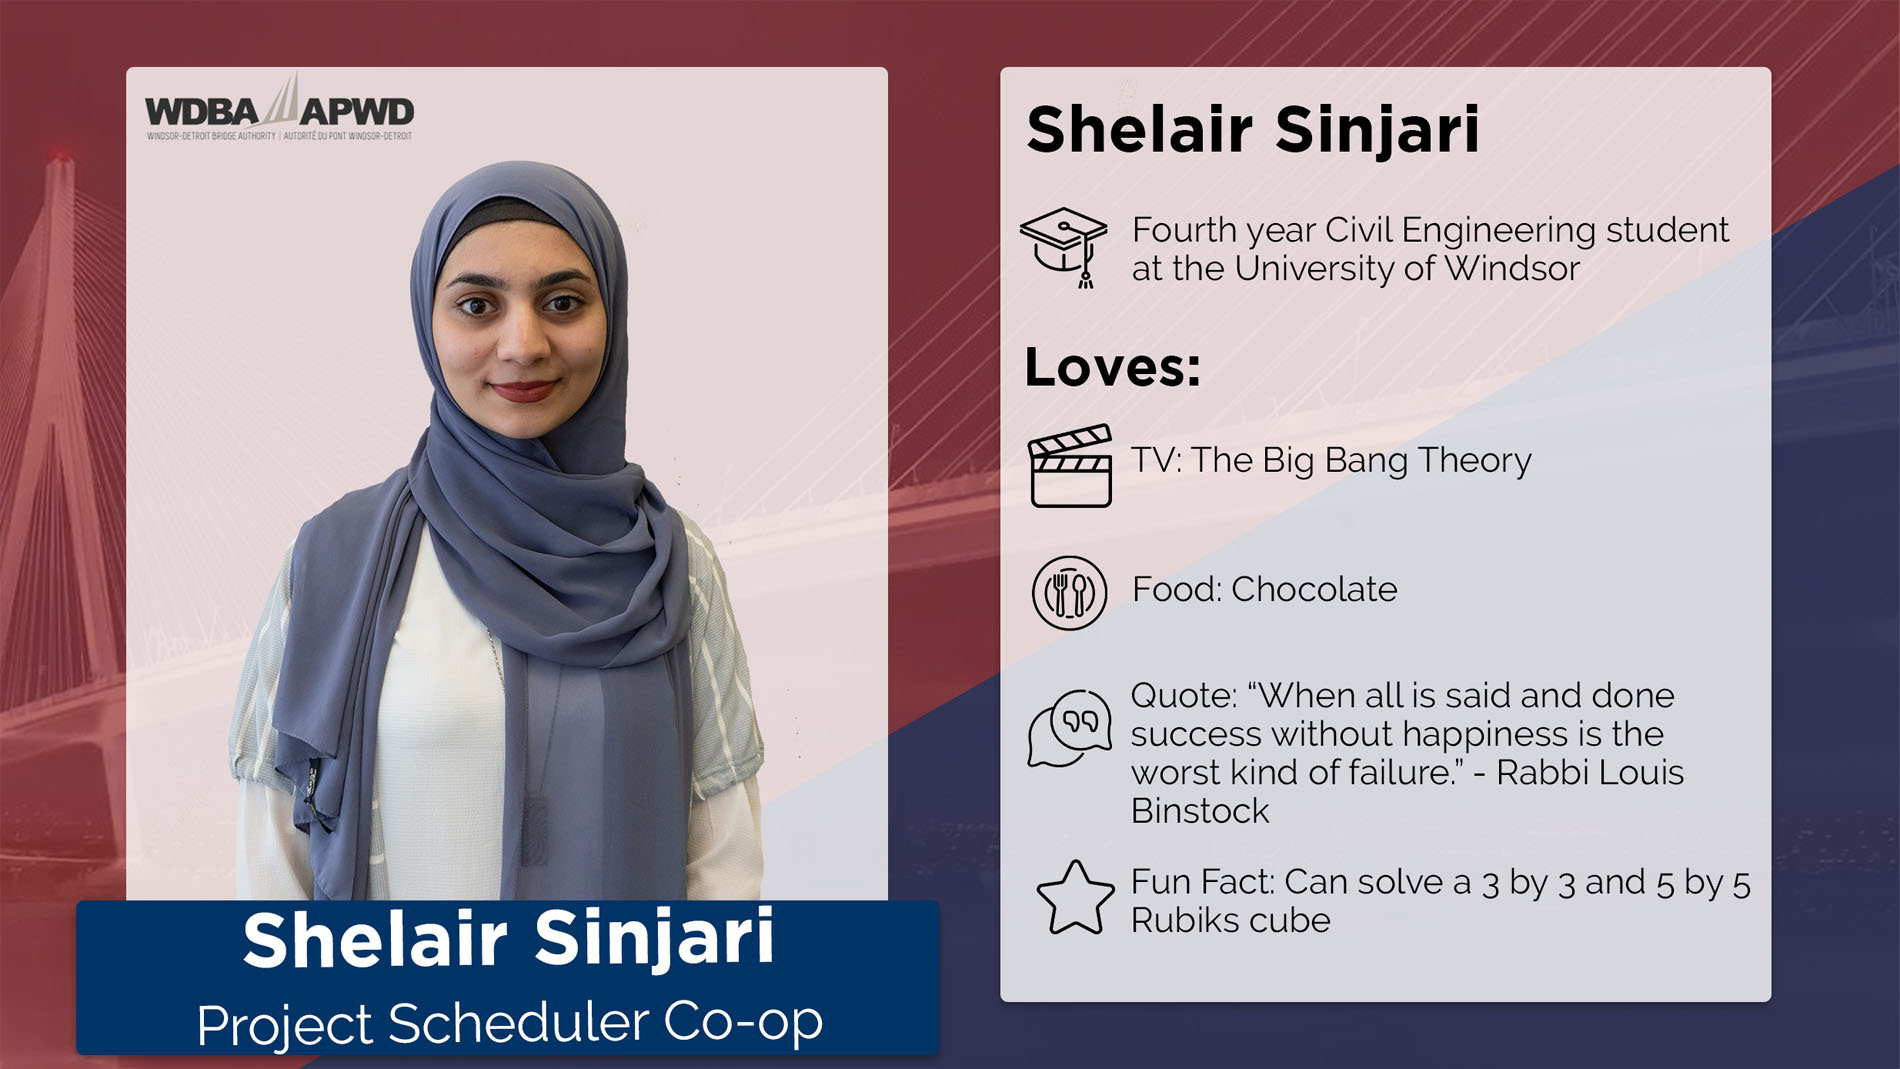 Shelair Sinjari, Project Scheduler Co-op. Fourth year Civil Engineering student at the University of Windsor. Loves: TV: The Big Bang Theory. Food: Chocolate. Qoute: "When all is said and done success without happiness is the worst kind of failure." - Rabbi Louis Binstock. Fun Fact: Can solve a 3 by 3 and 5 by 5 Rubik's Cube. 